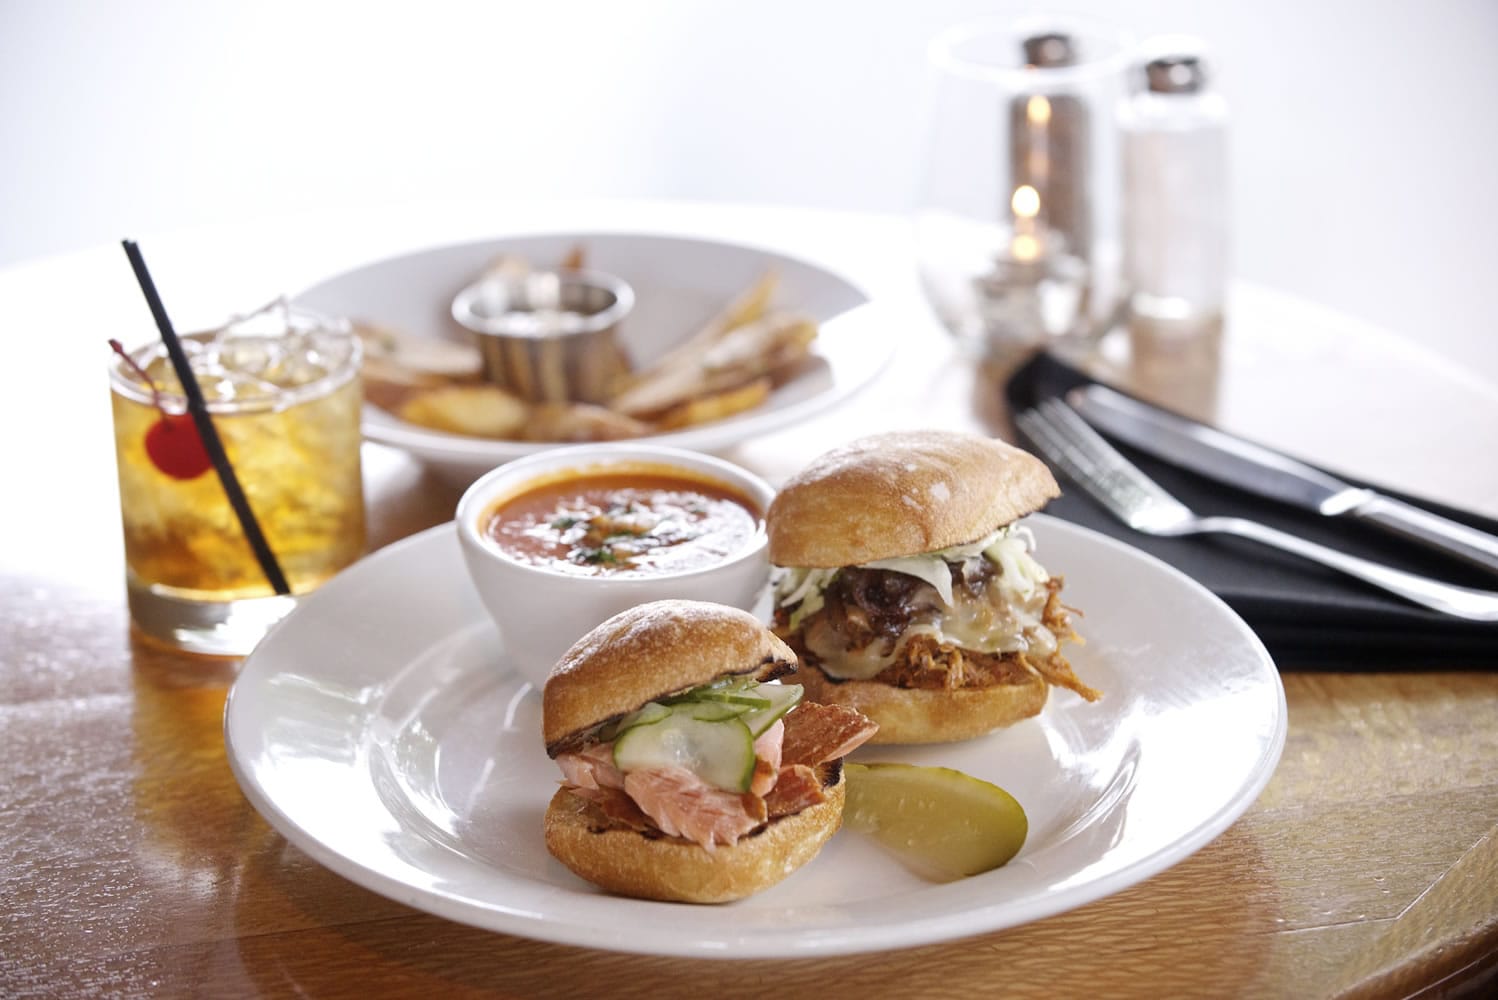 Charlie's Bistro in Vancouver serves a BBQ Pork Slider and a Smoked Salmon &amp; Cucumber Slider with Sweet Potato Fries.